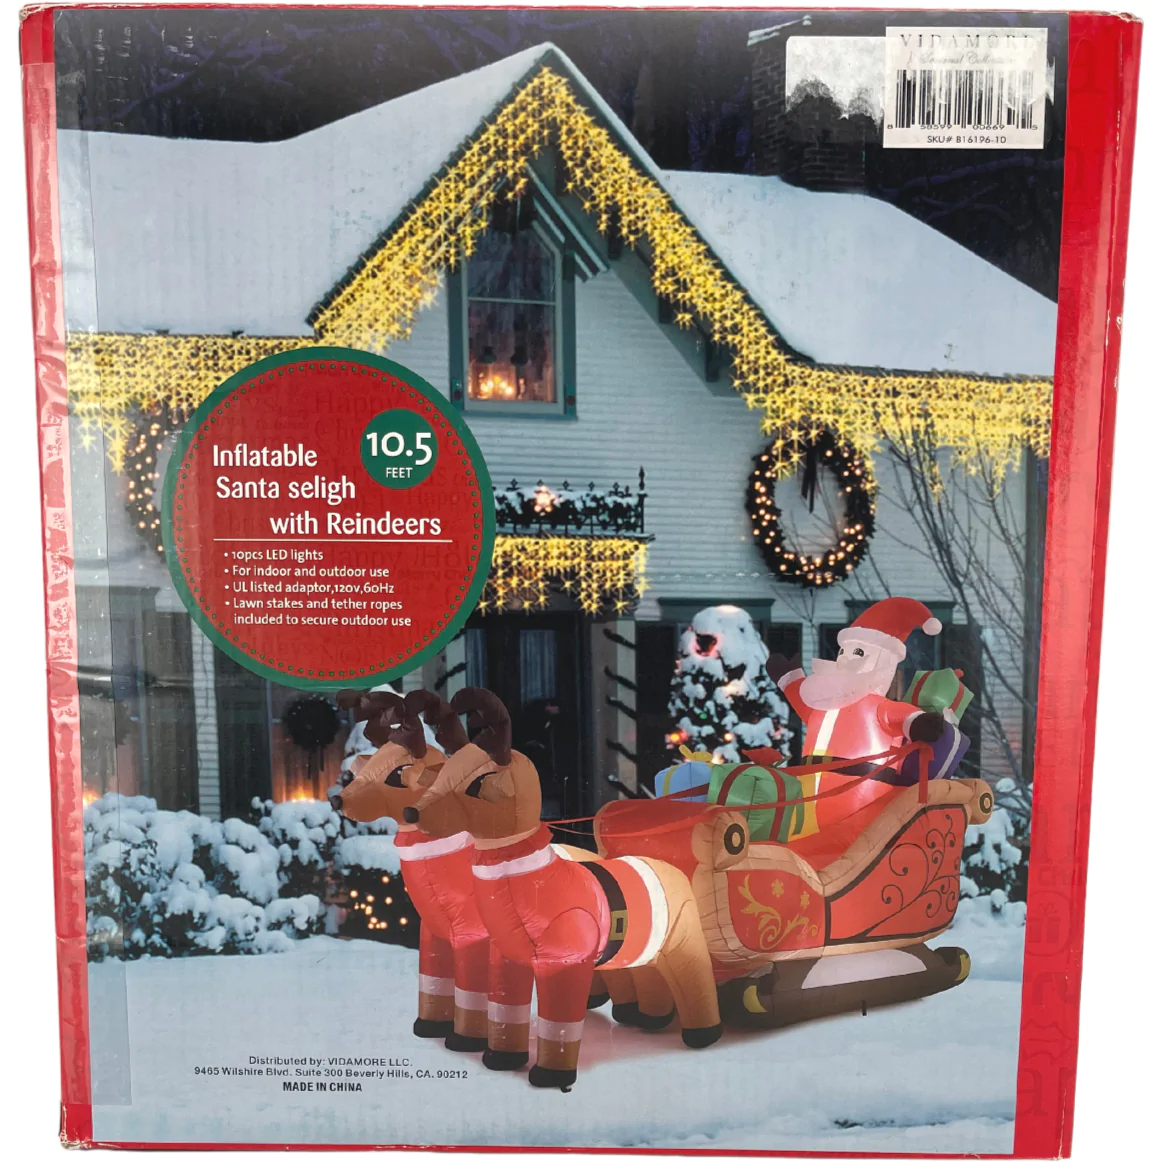 Vidamore Inflatable Santa Sleigh with Reindeers / 10.5 ft Tall / Outdoor Christmas Decorations